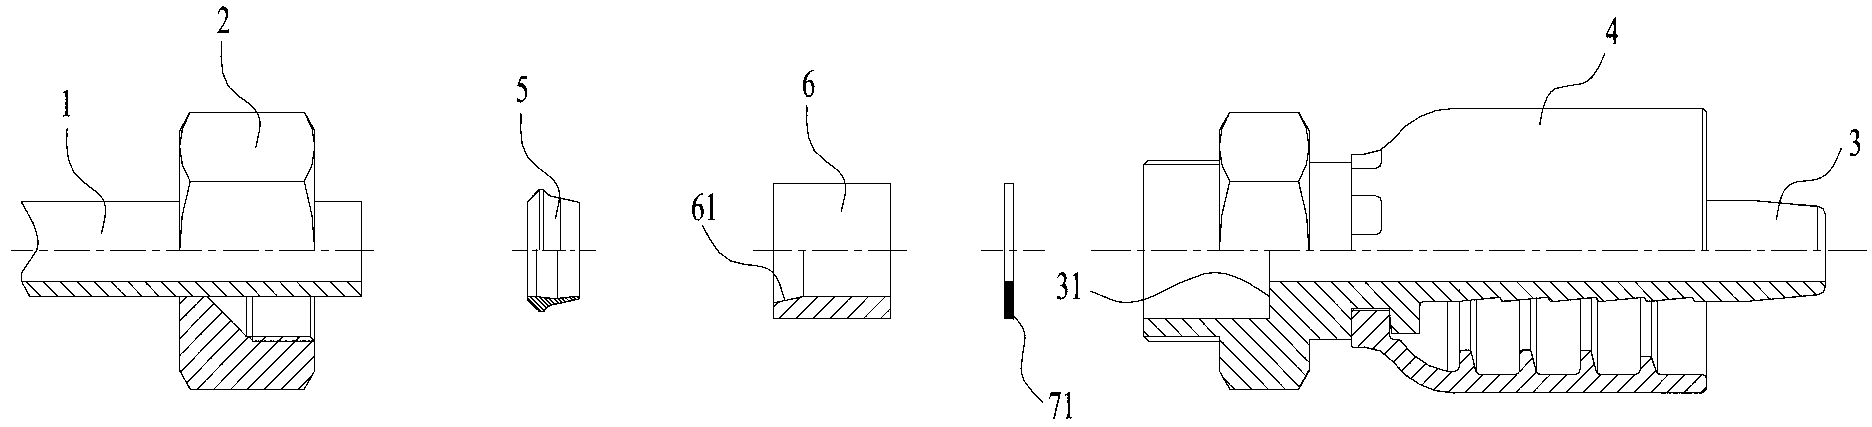 Pipeline connection structure and hydraulic pipeline